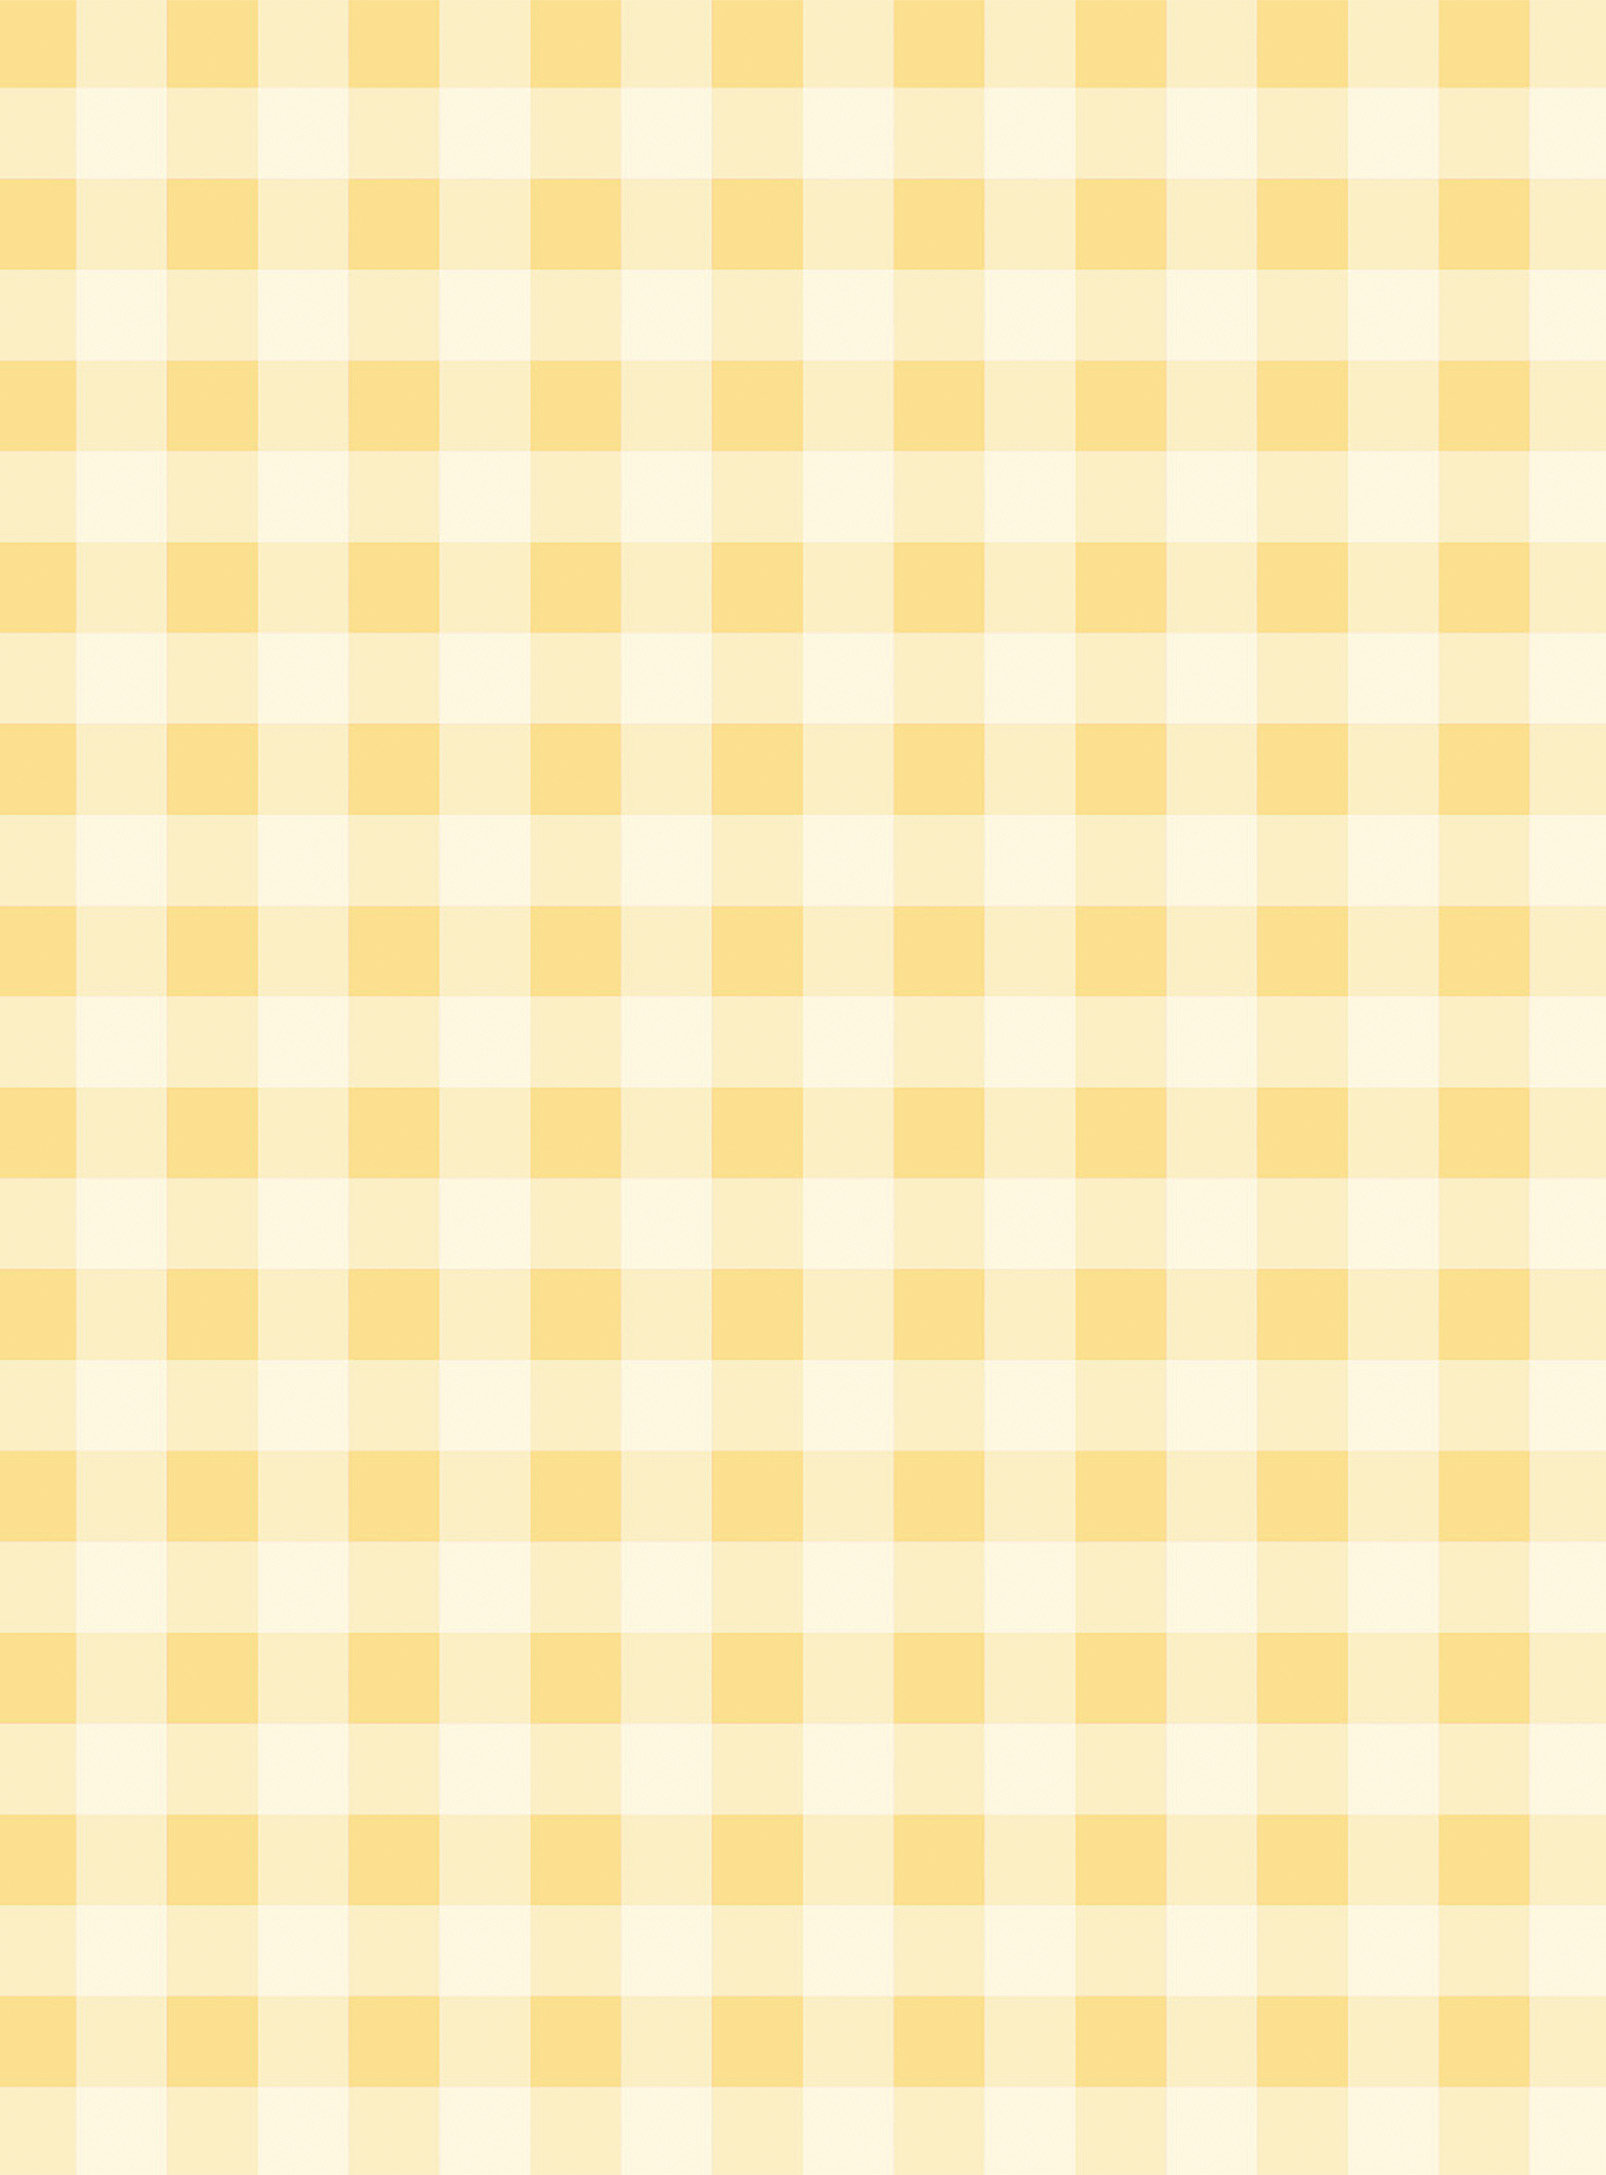 Station D Milk Shake Checkered Wallpaper Strip See Available Sizes In Bright Yellow